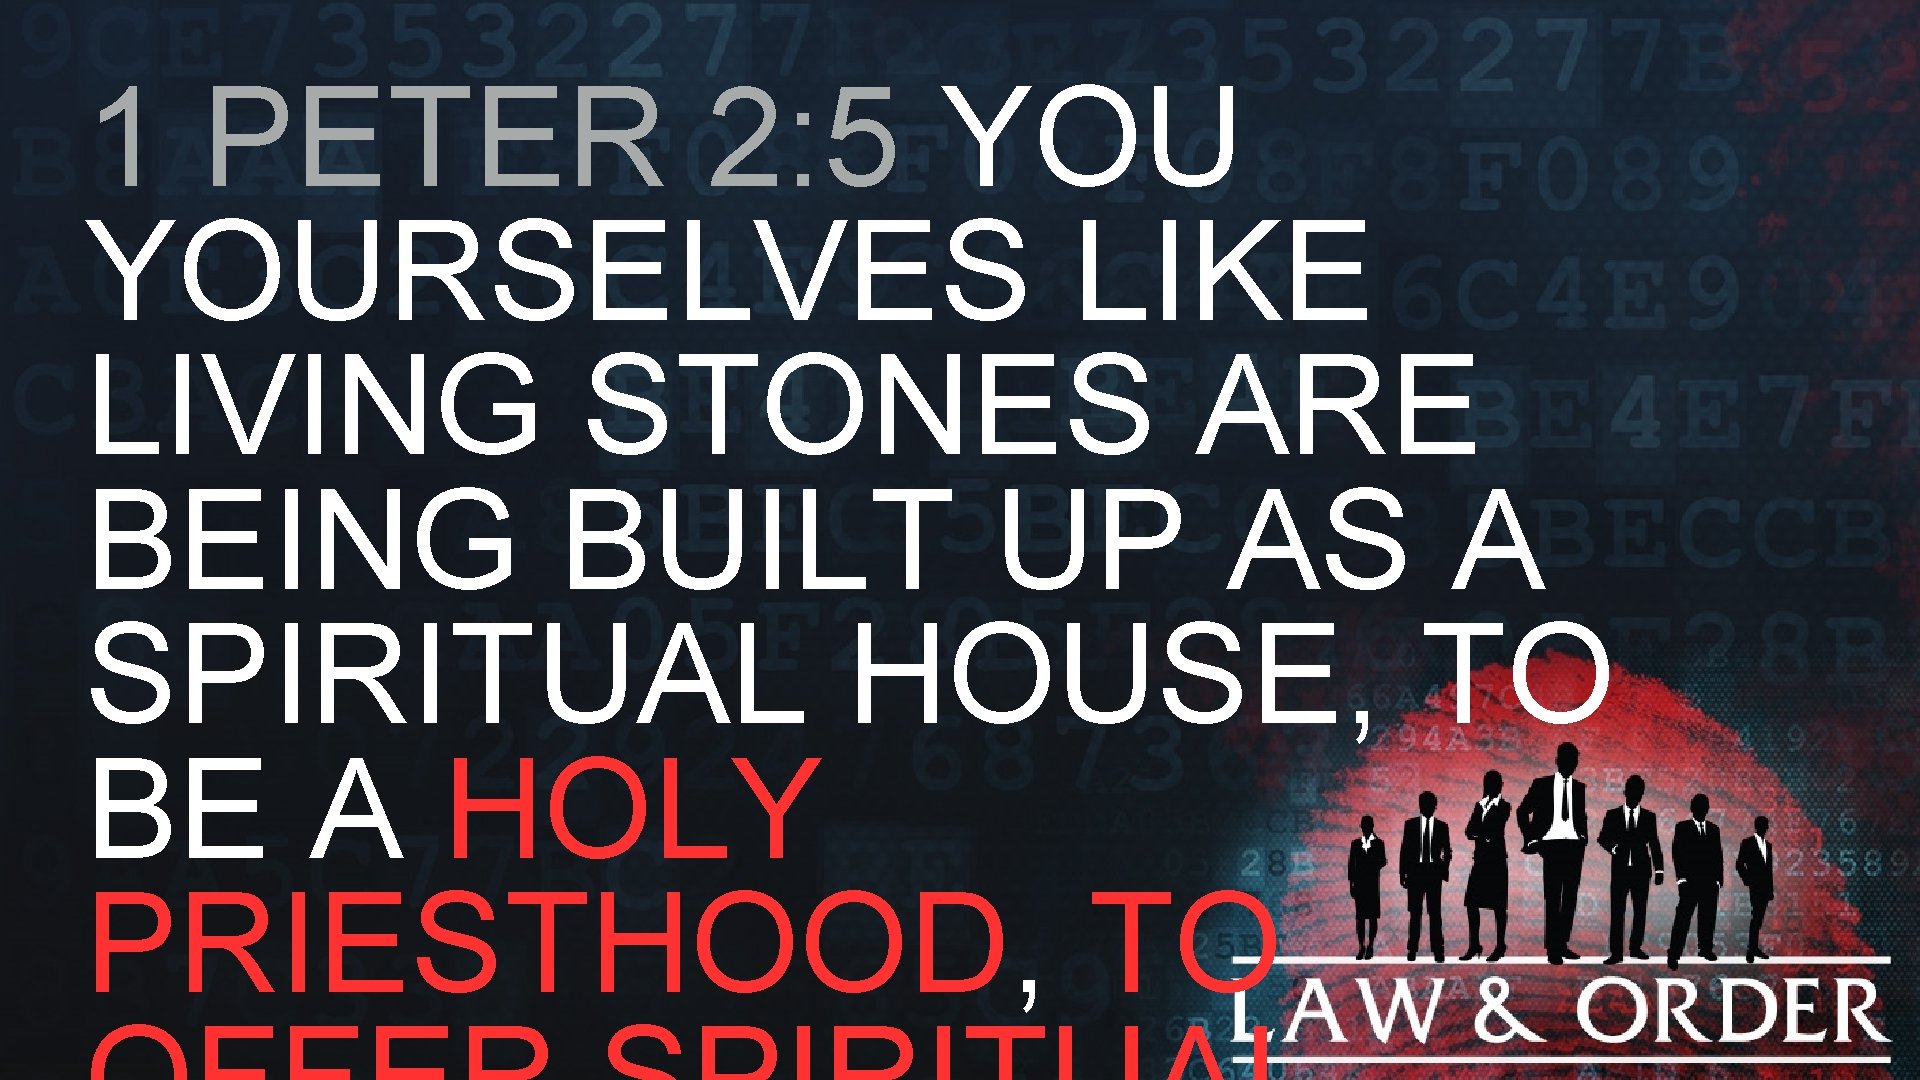 1 PETER 2: 5 YOURSELVES LIKE LIVING STONES ARE BEING BUILT UP AS A